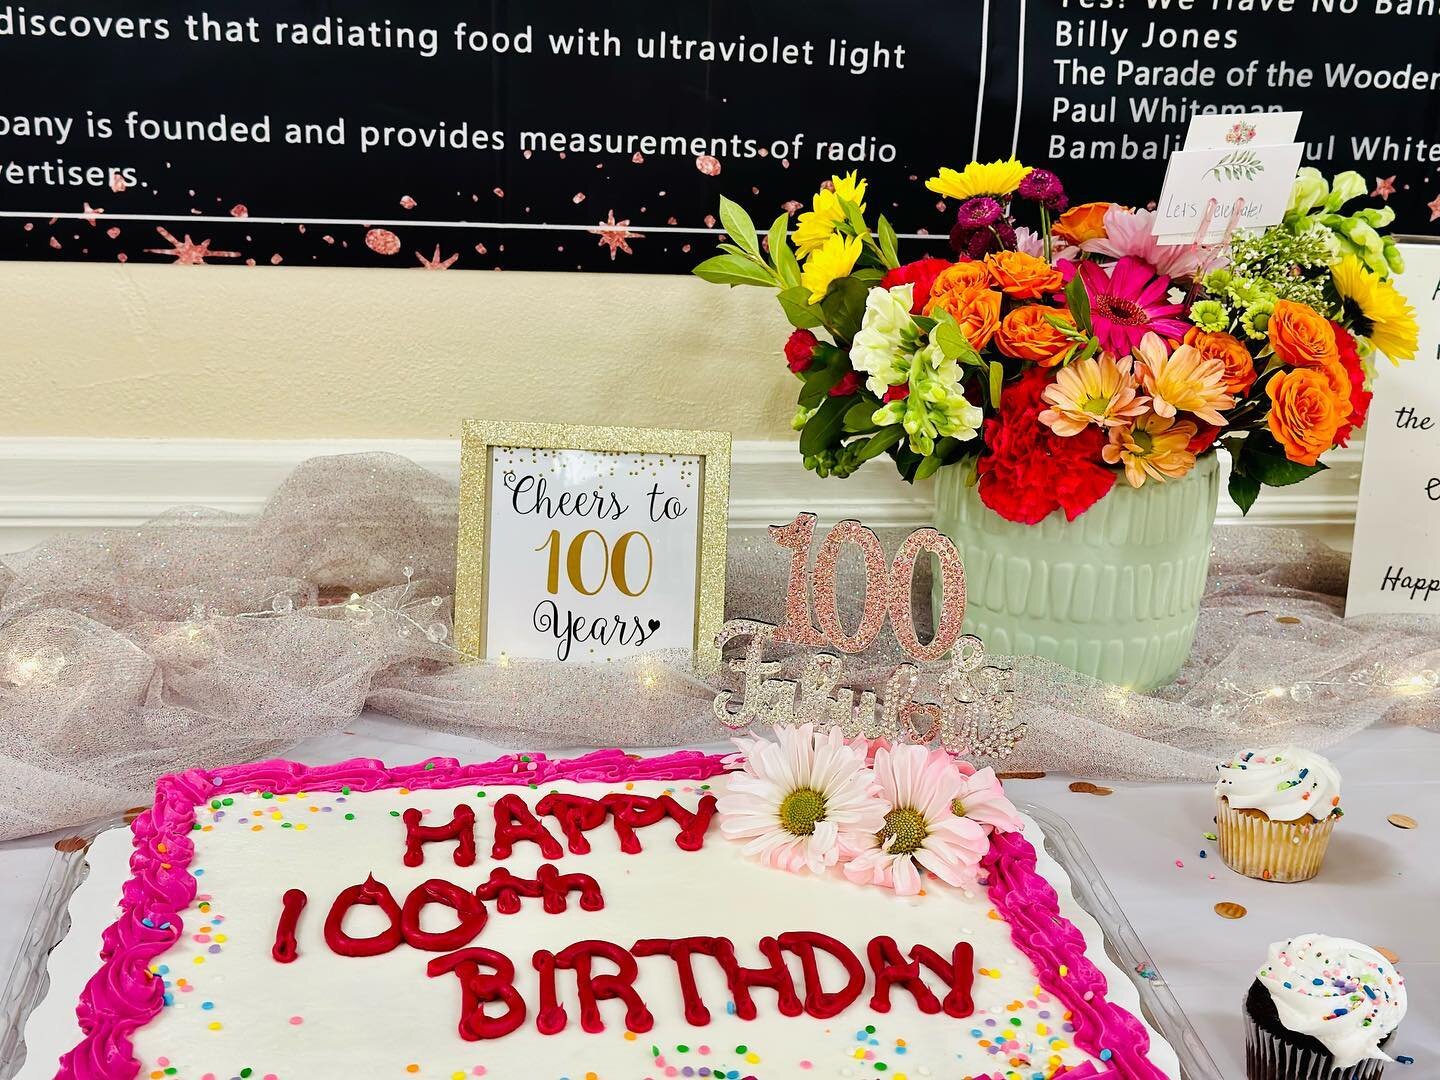 This afternoon, I had the privilege of attending a birthday celebration for Mary who turned 100 today! 🎉 🎂 She was the most sweetest and vibrant 100 YO I have ever met! The staff did such an amazing job putting together her celebration. 💗🥳